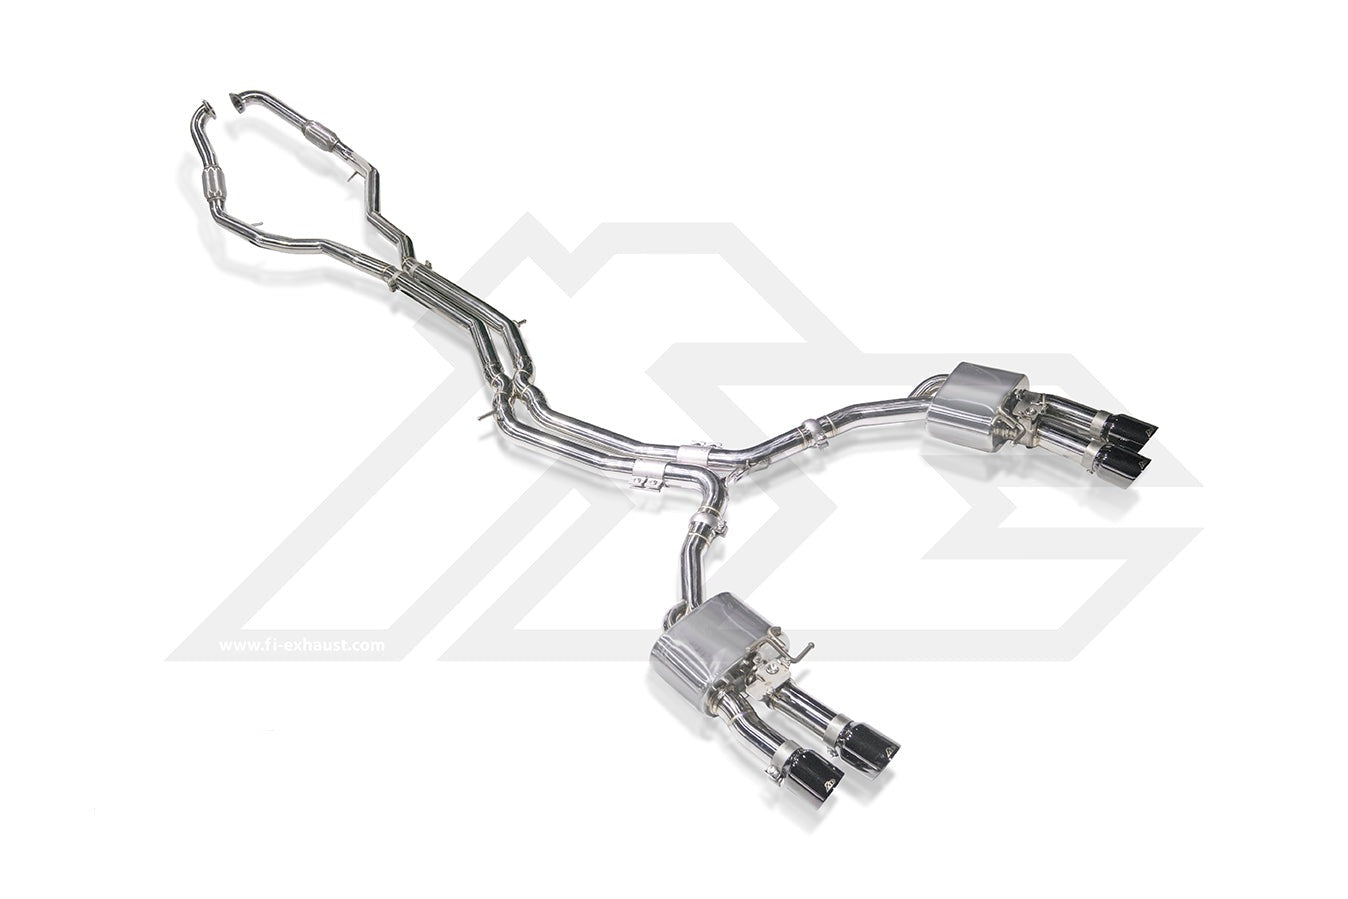 Fi Exhaust Valvetronic Exhaust System For Audi S4 B9 / S5 F5 17+